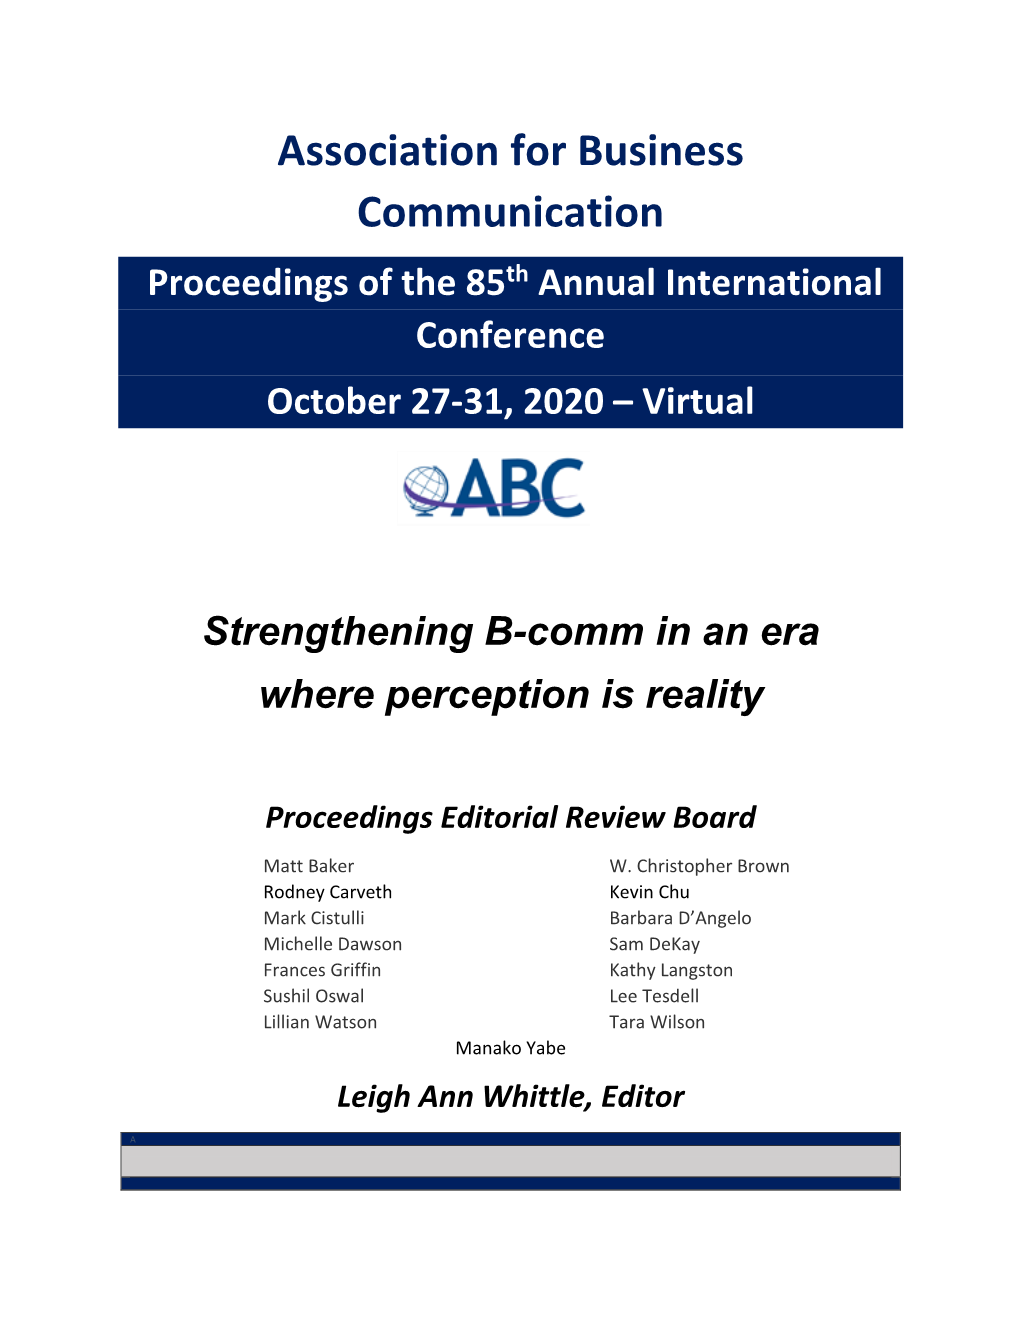 Association for Business Communication Proceedings of the 85Th Annual International Conference October 27-31, 2020 – Virtual